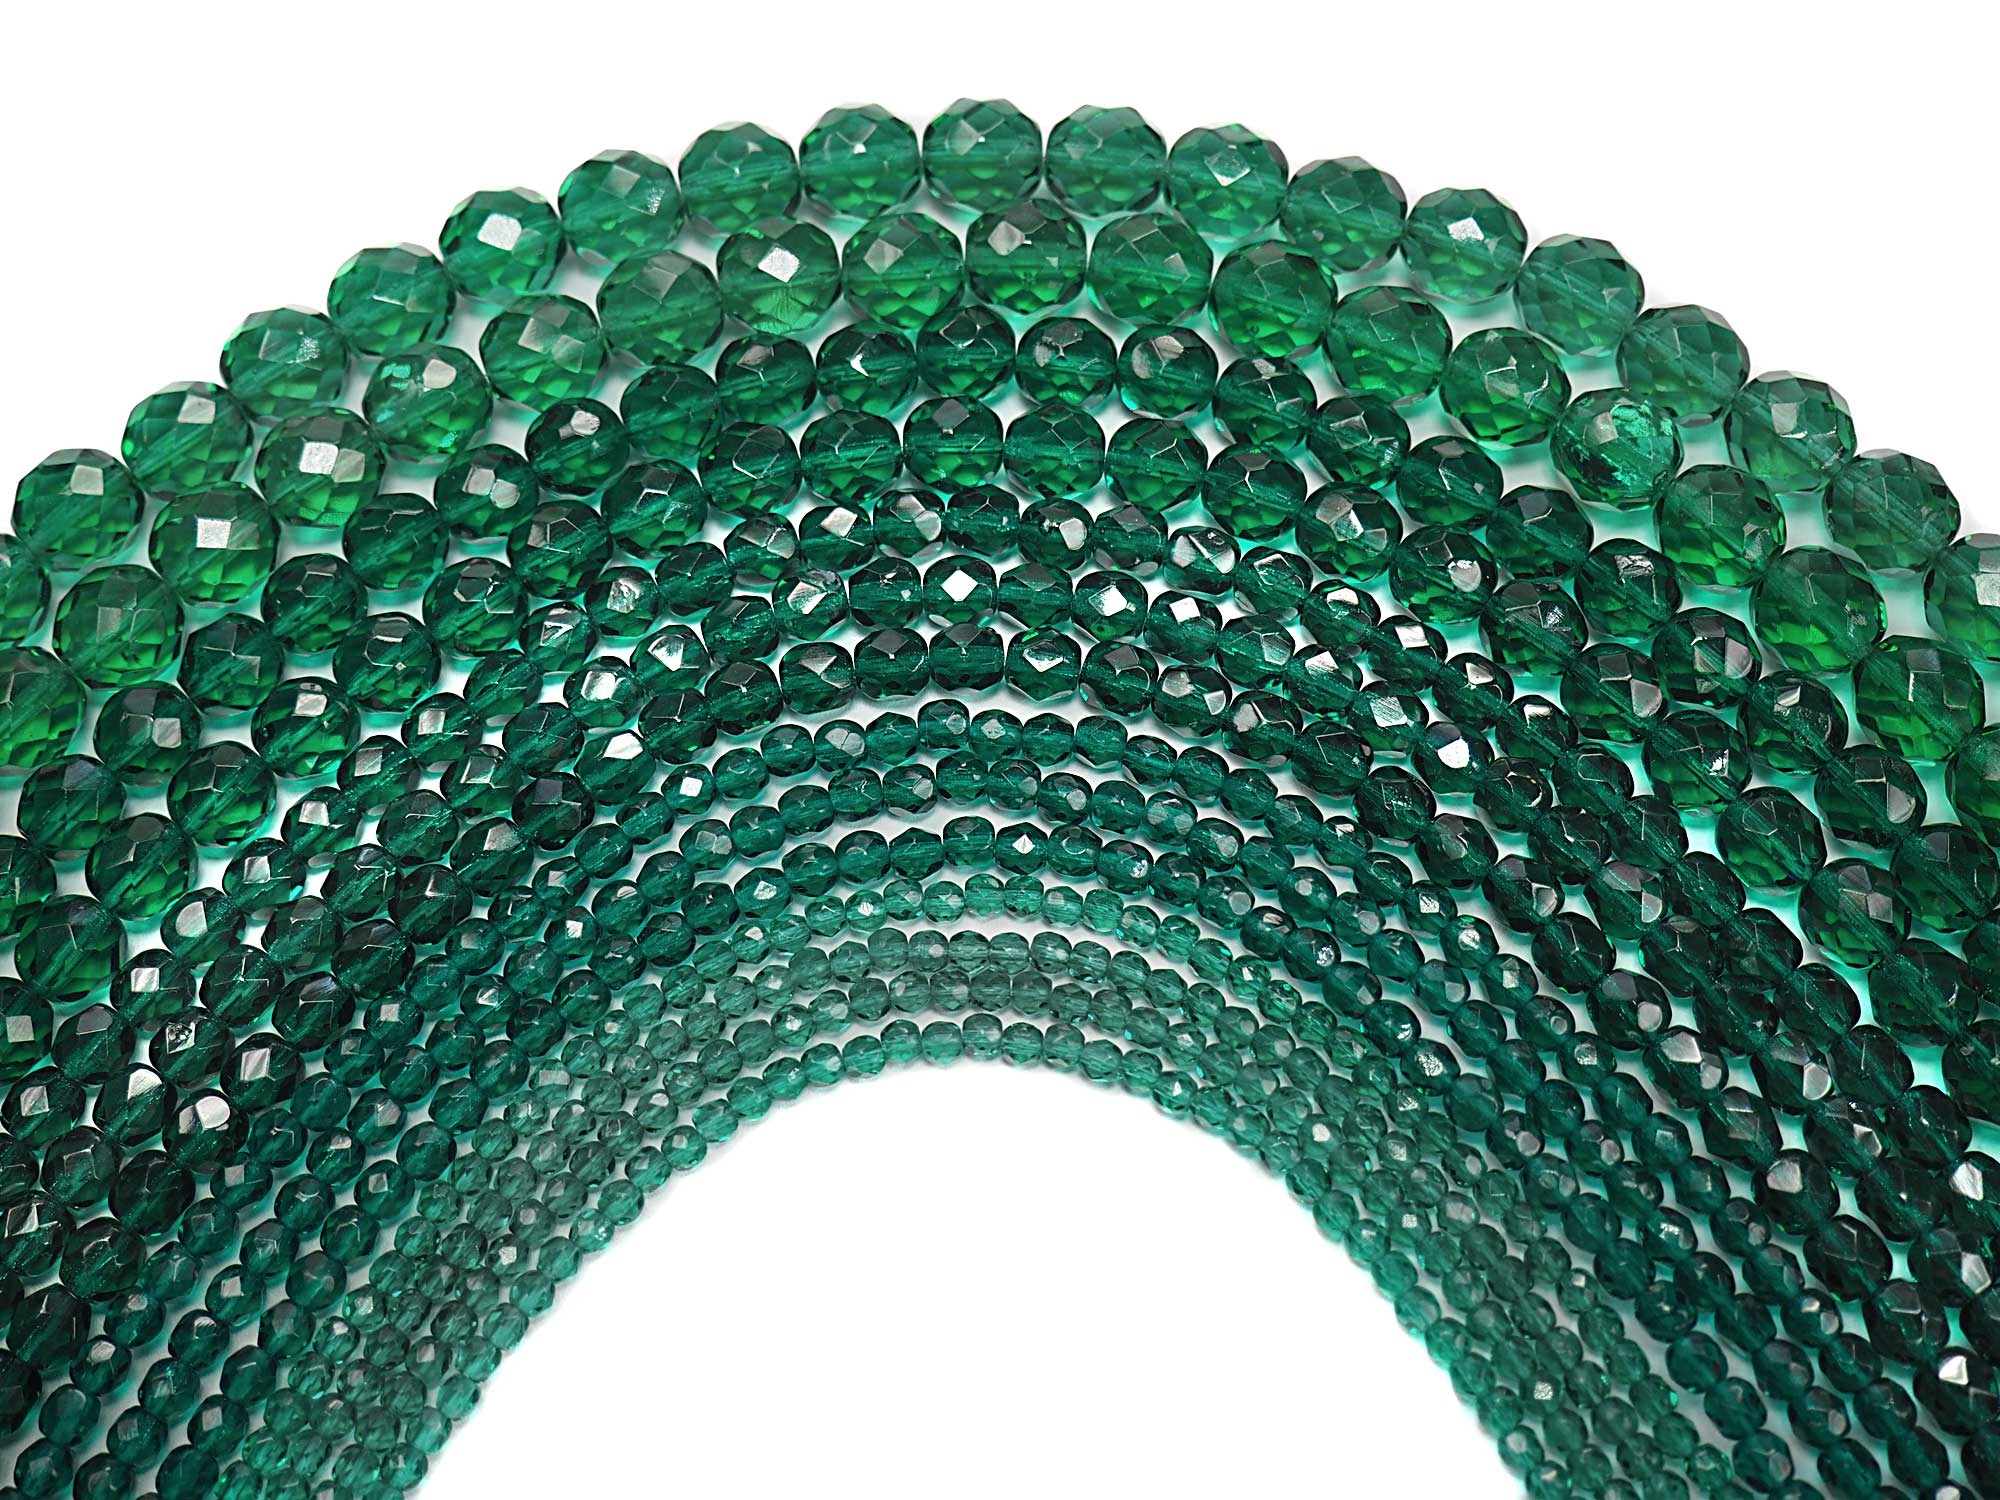 Emerald green, Czech Fire Polished Round Faceted Glass Beads, 16 inch strand